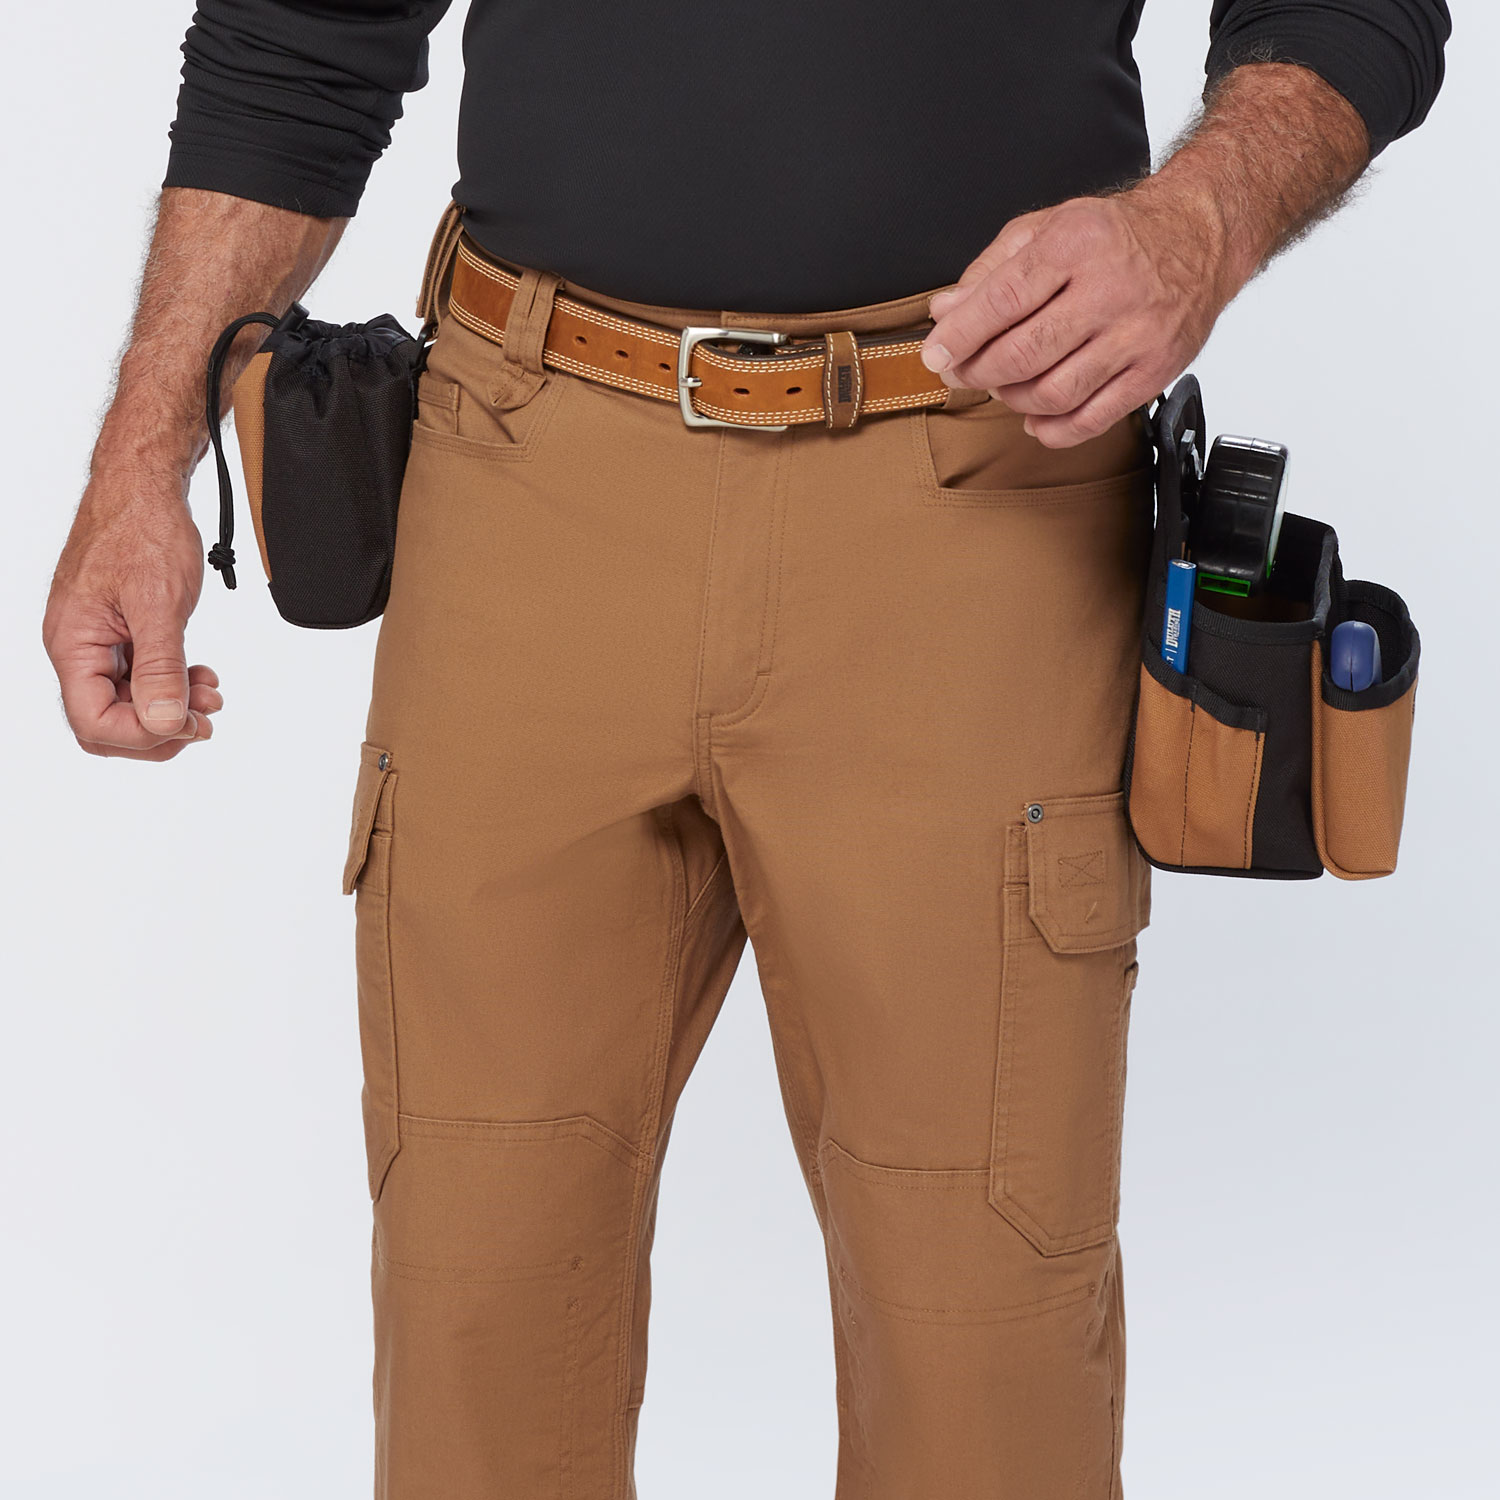 Men's DuluthFlex Fire Hose Ultimate Relaxed Fit Cargo Pants